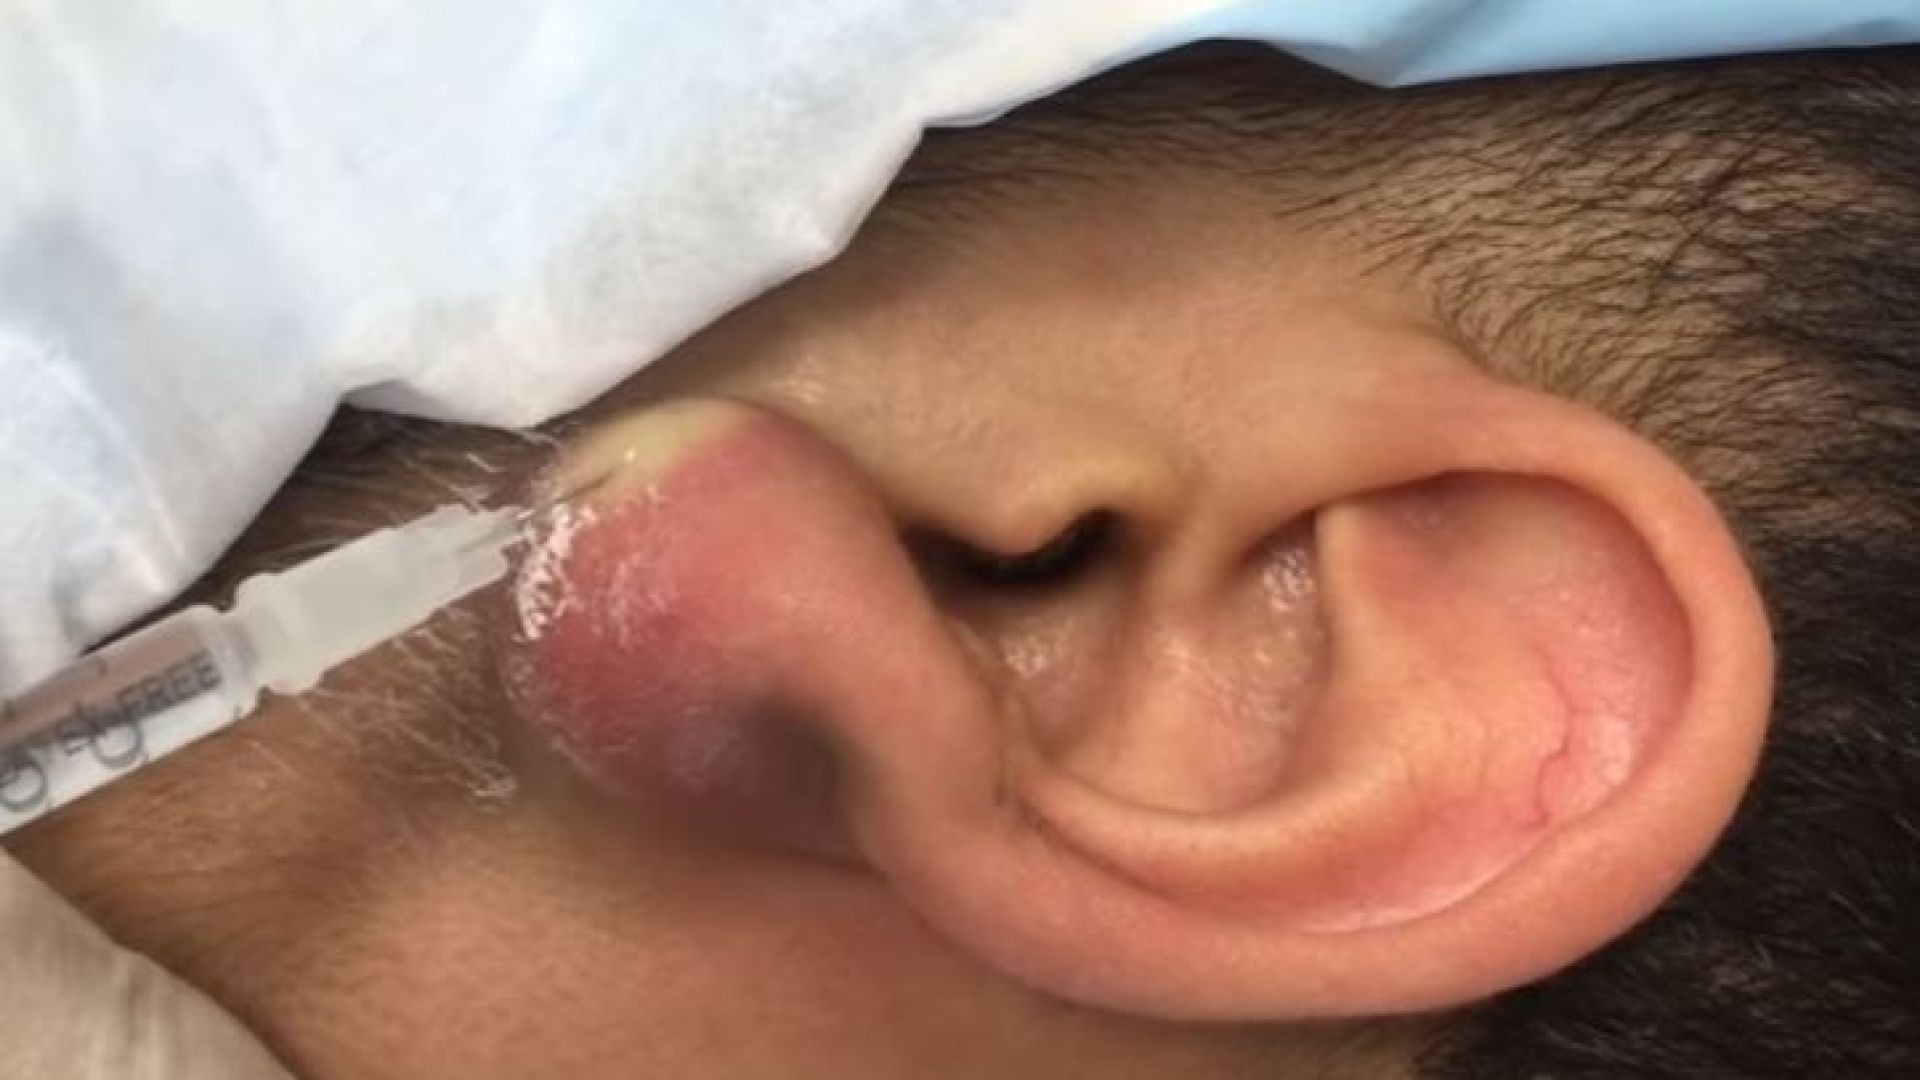 Giant Pus-Filled Earlobe Redux with Comments!